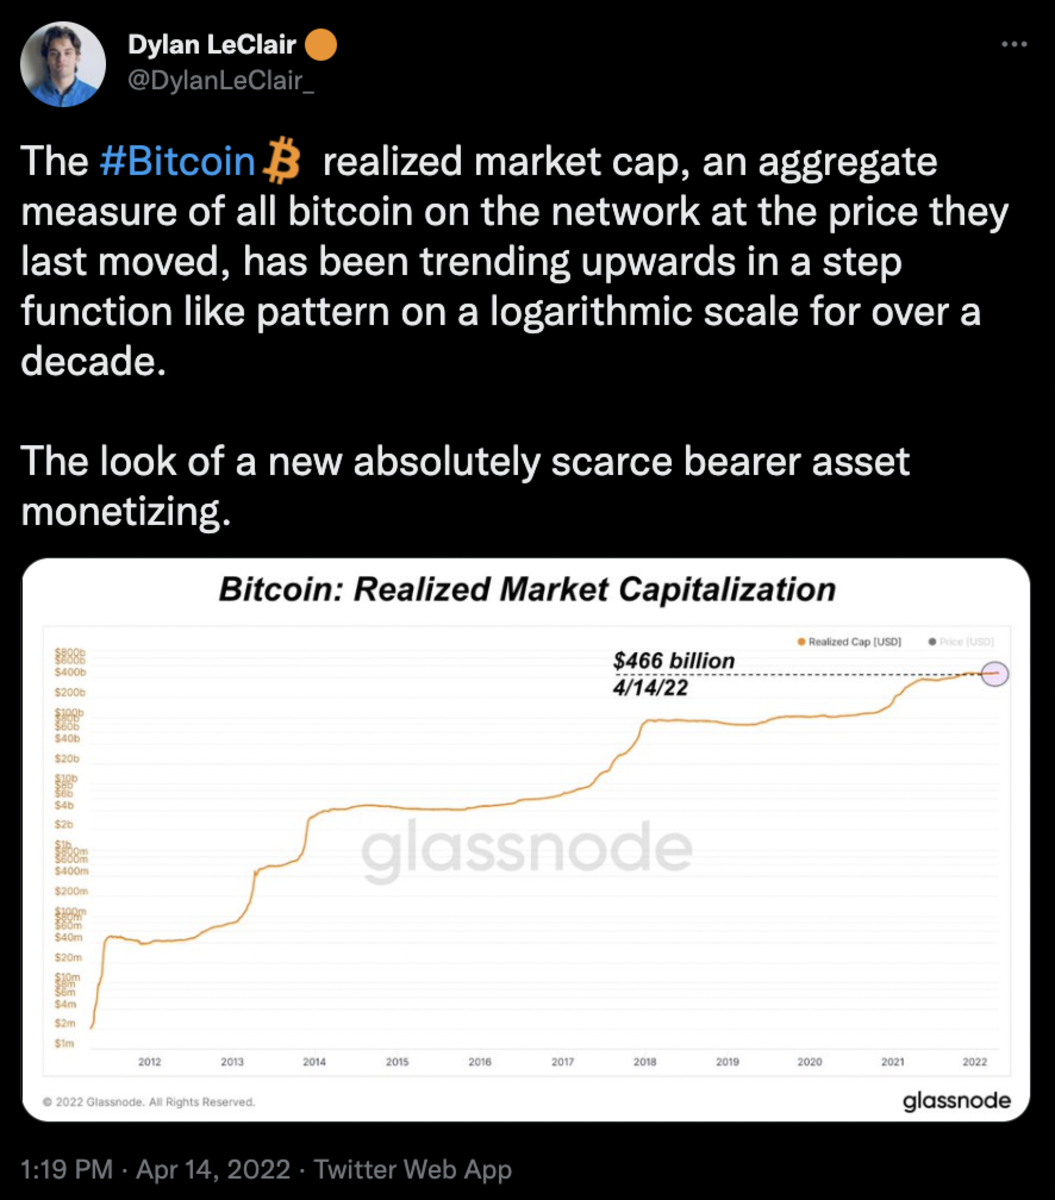 Realized market capitalization of bitcoin is one of the best ways to quantify the monetization process and the metric is showing re-accumulation.